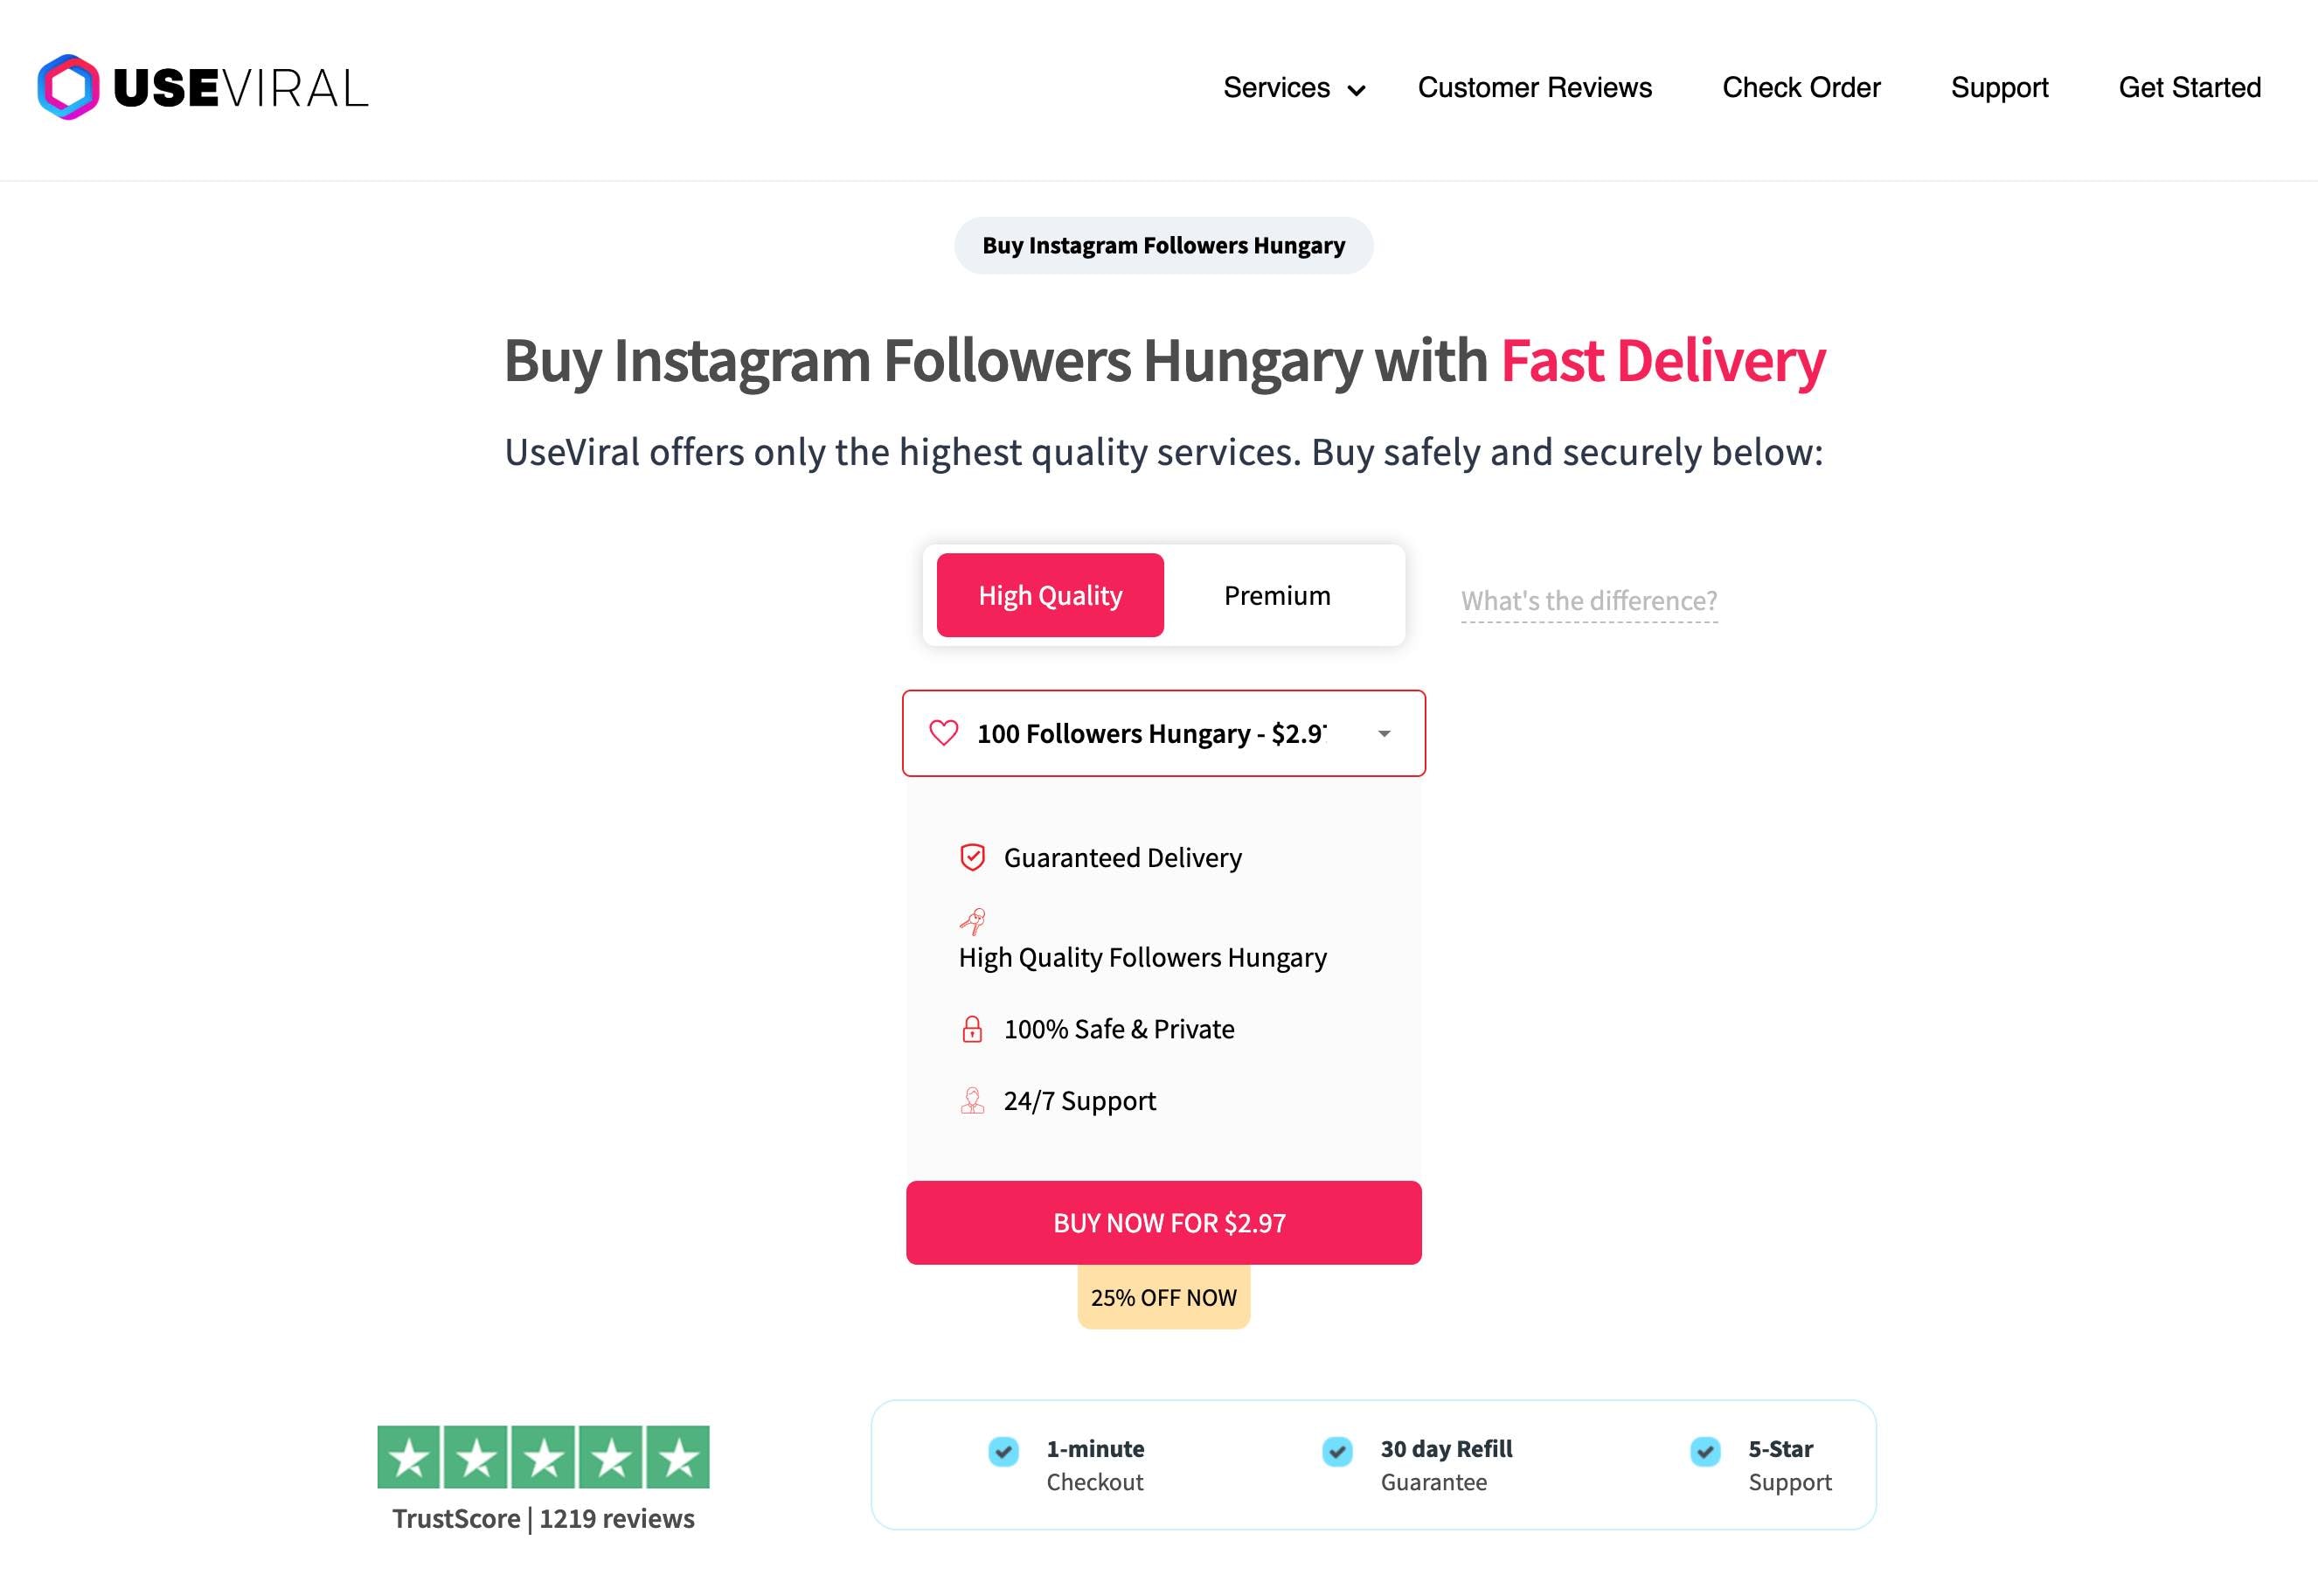 useviral buy instagram followers hungary page